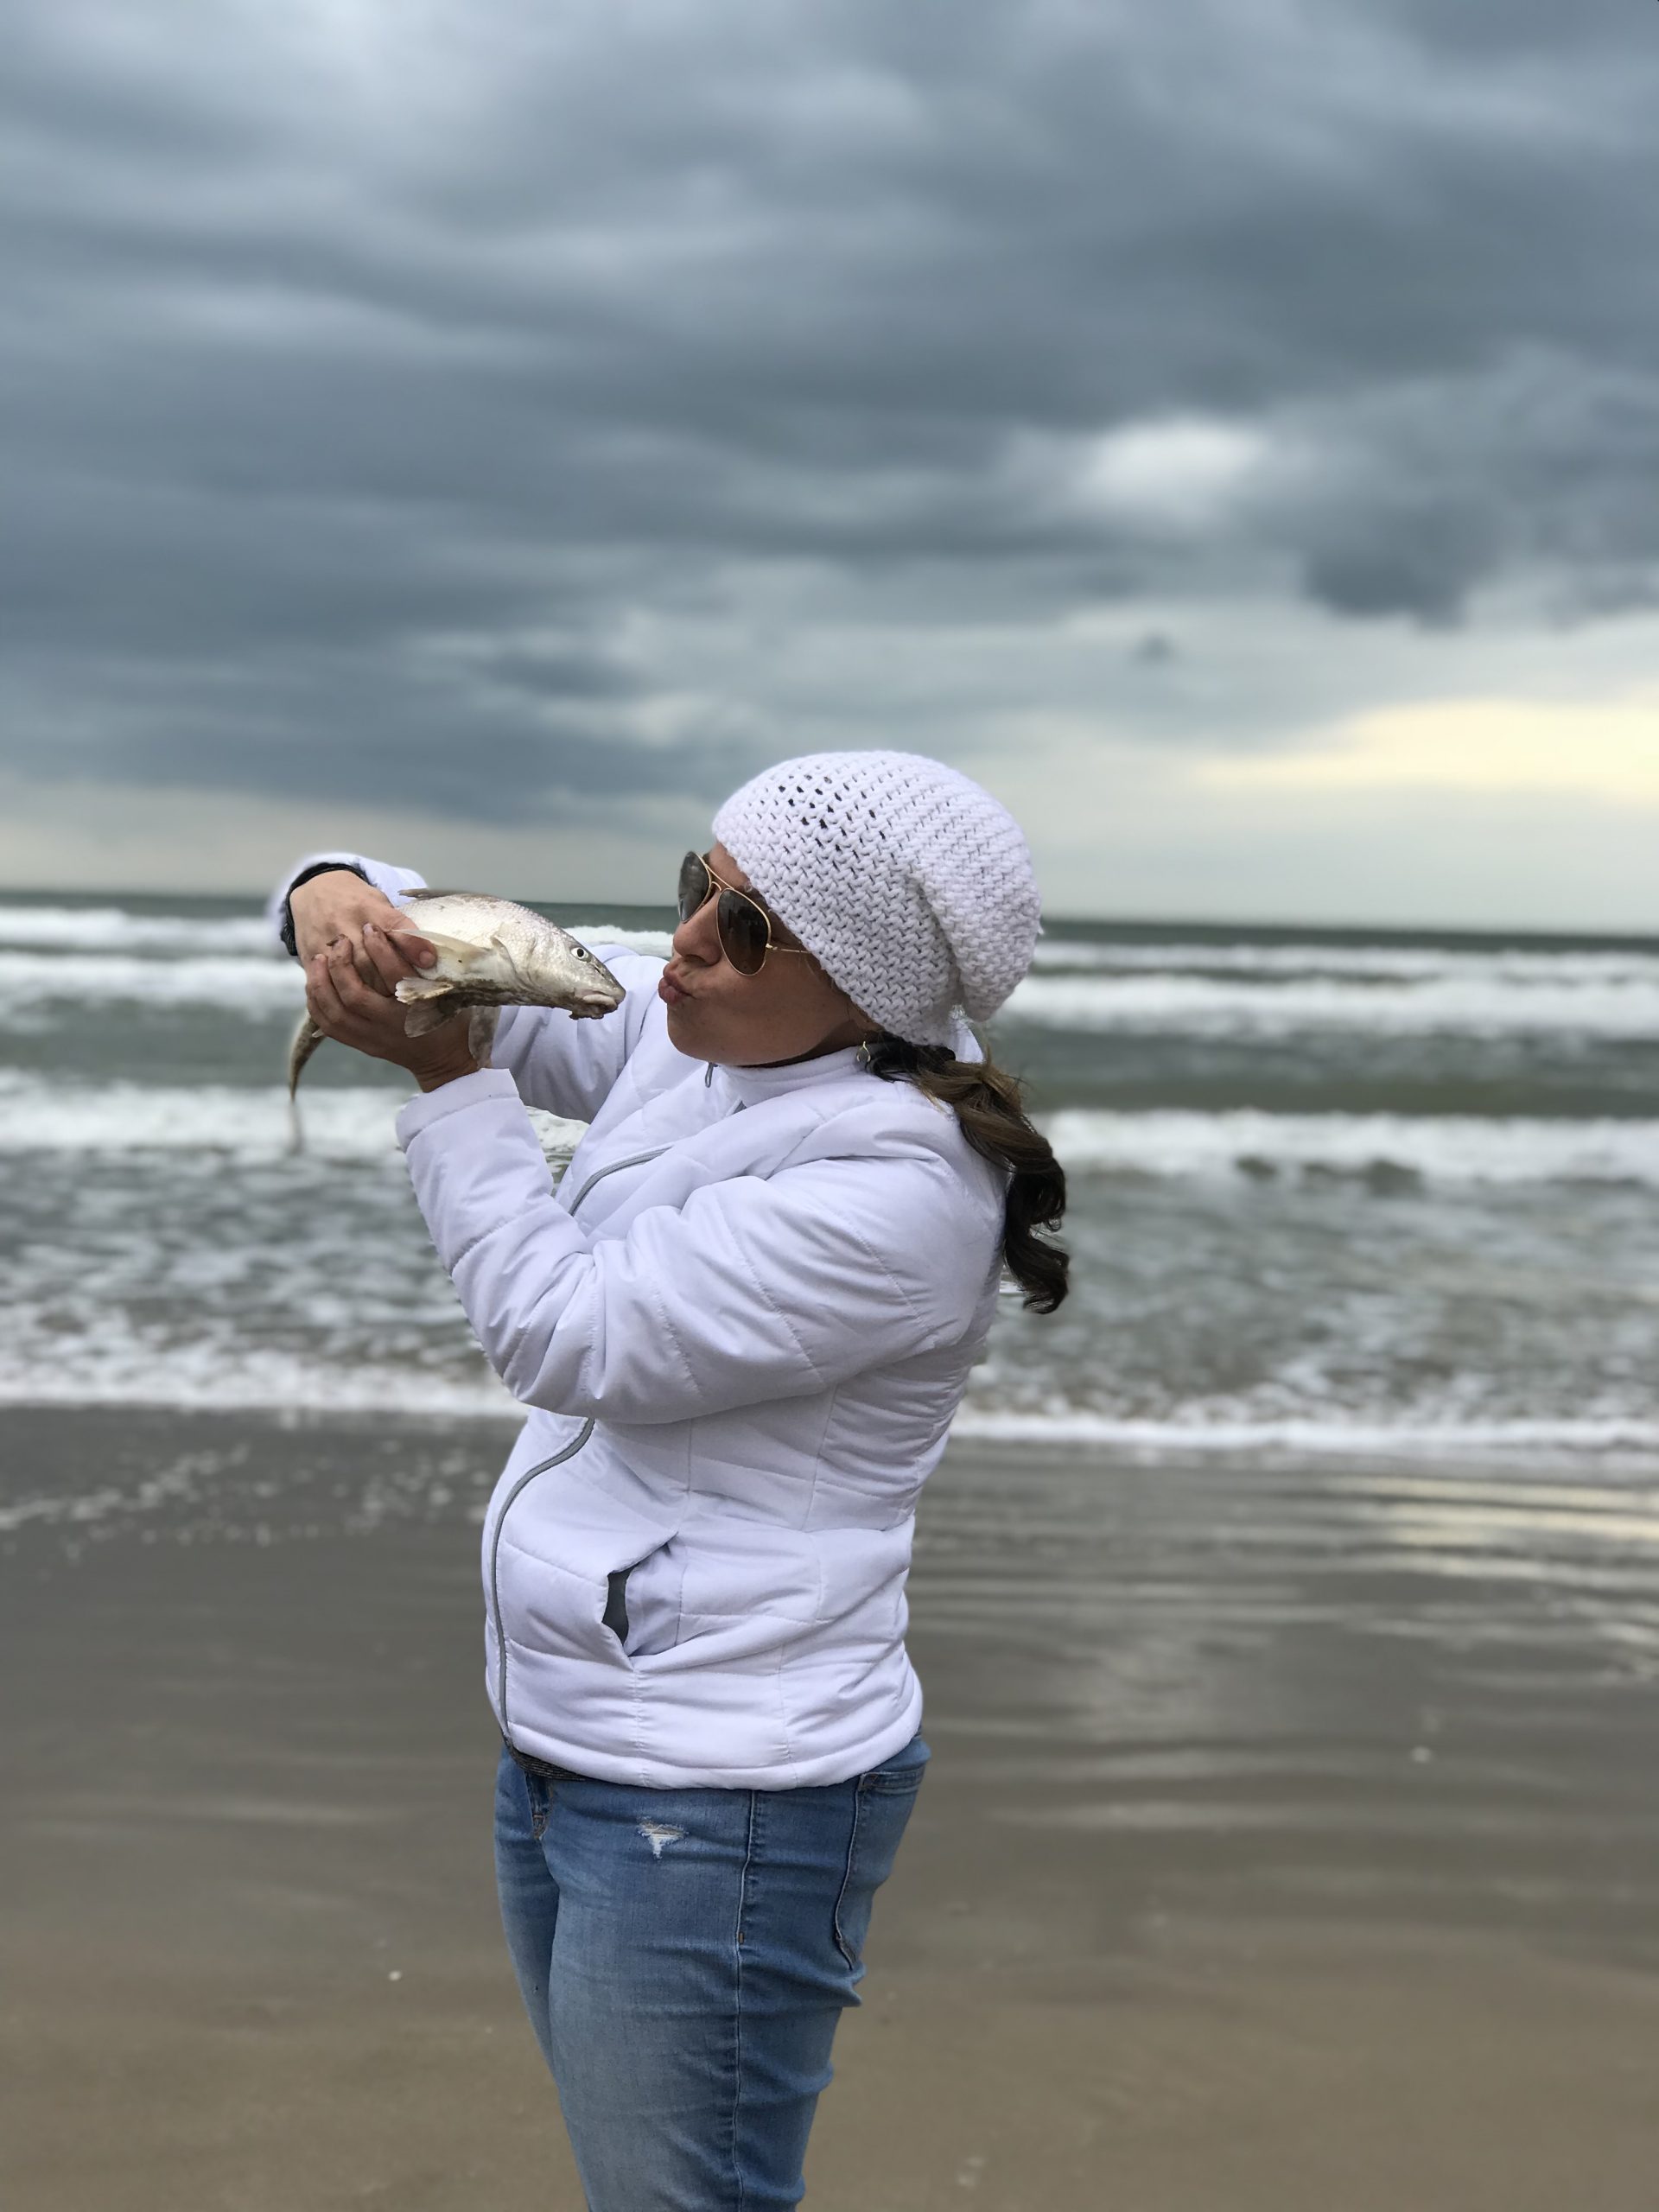 Photo of an ominous, dark and cloudy sky. On the beach. Waves crash upon the shore. Standing on the shore, a woman in jeans, a white puffer coat, white knit hat, and aviator sunglasses. She is holding a fish up to close to her face, about to kiss it!